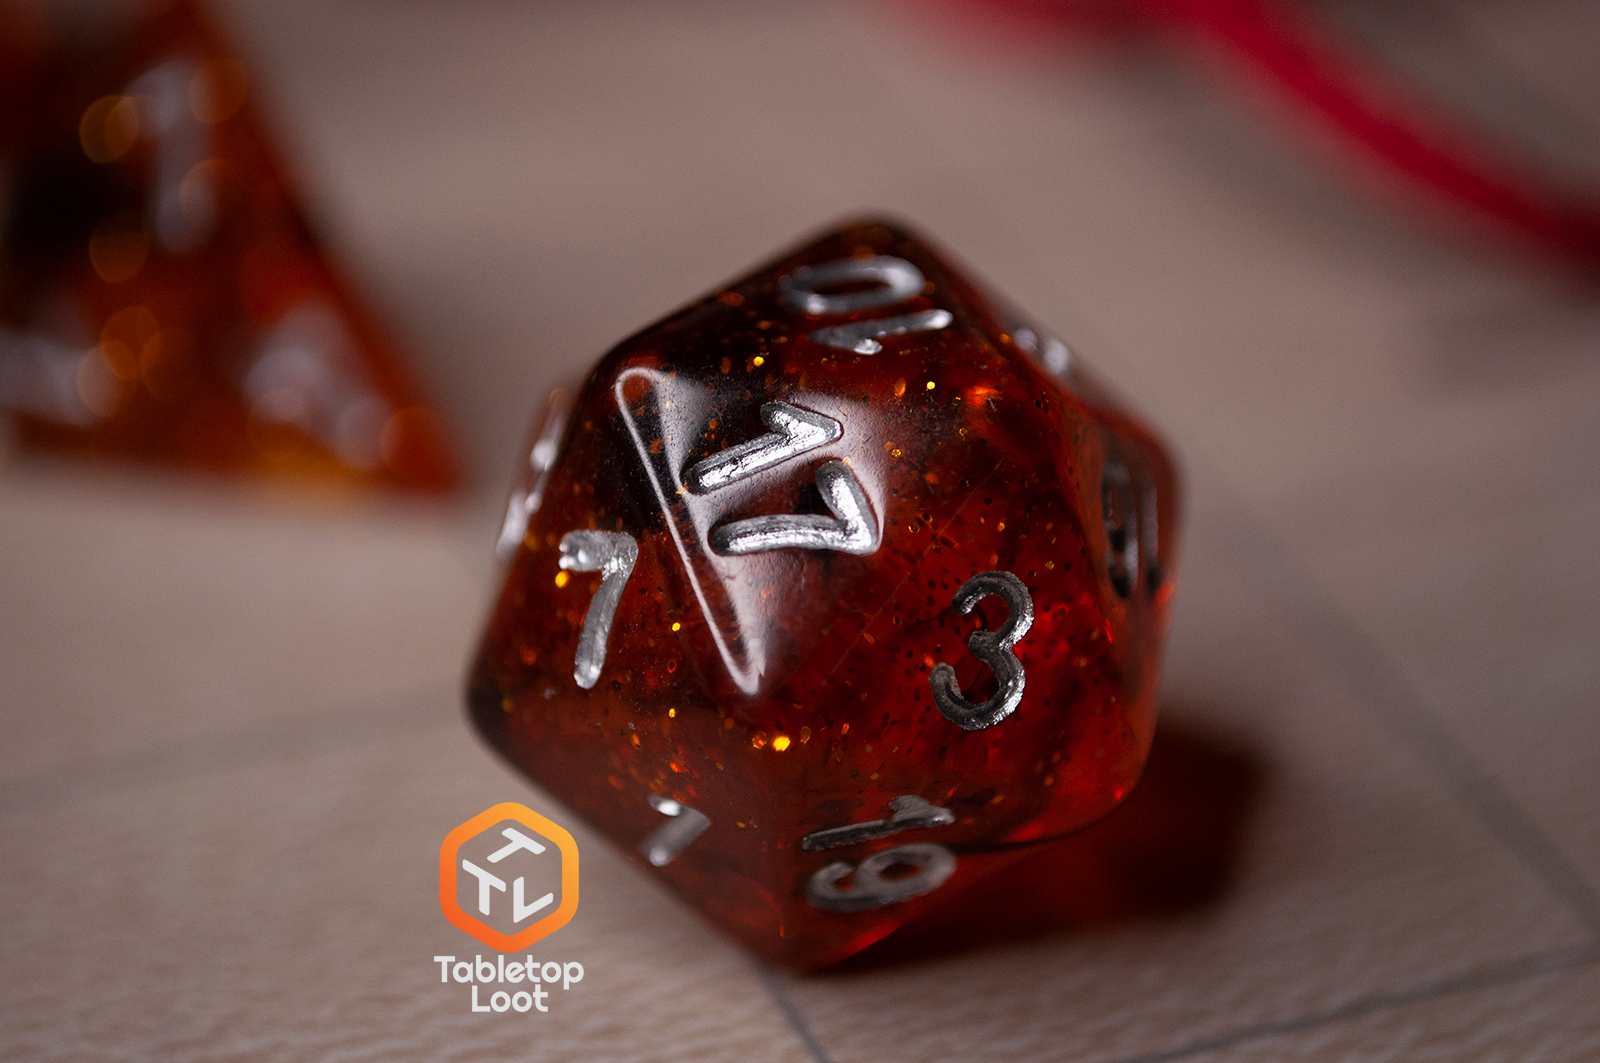 A close up of the D20 from the Dissonant Whispers 7 piece dice set from Tabletop Loot with swirls of black in sparkling amber color, inked in silver.